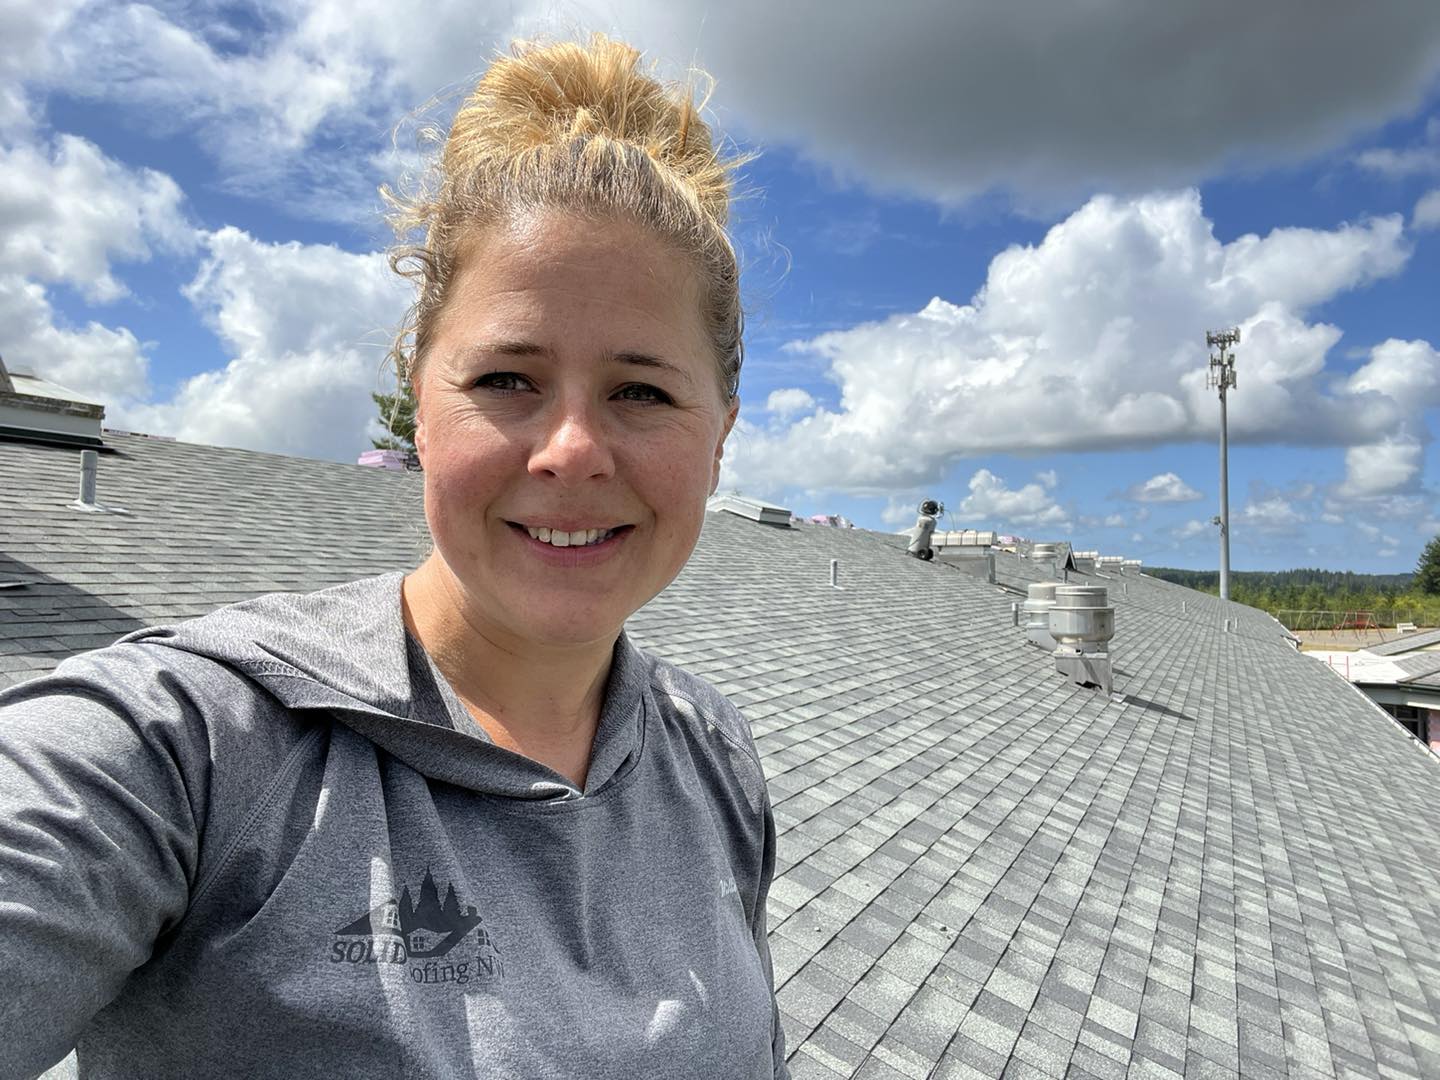 Sara Klindtworth: Solid Roofing NW - Roofing with Purpose in Salem, Oregon